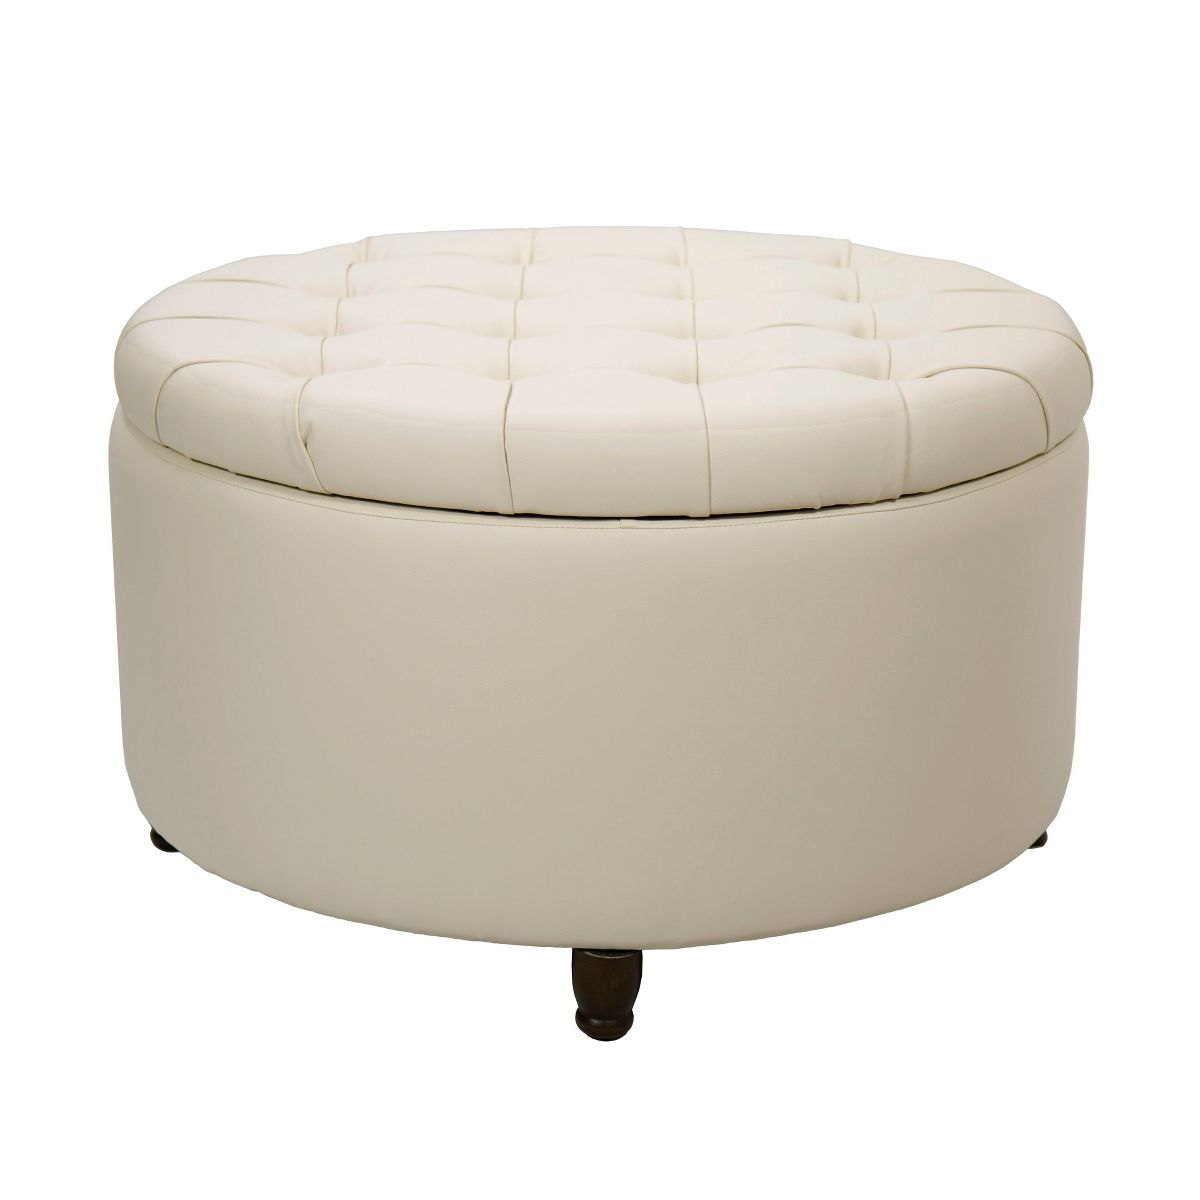 Large Round Tufted Storage Ottoman with Lift Off Lid - WOVENBYRD | Target